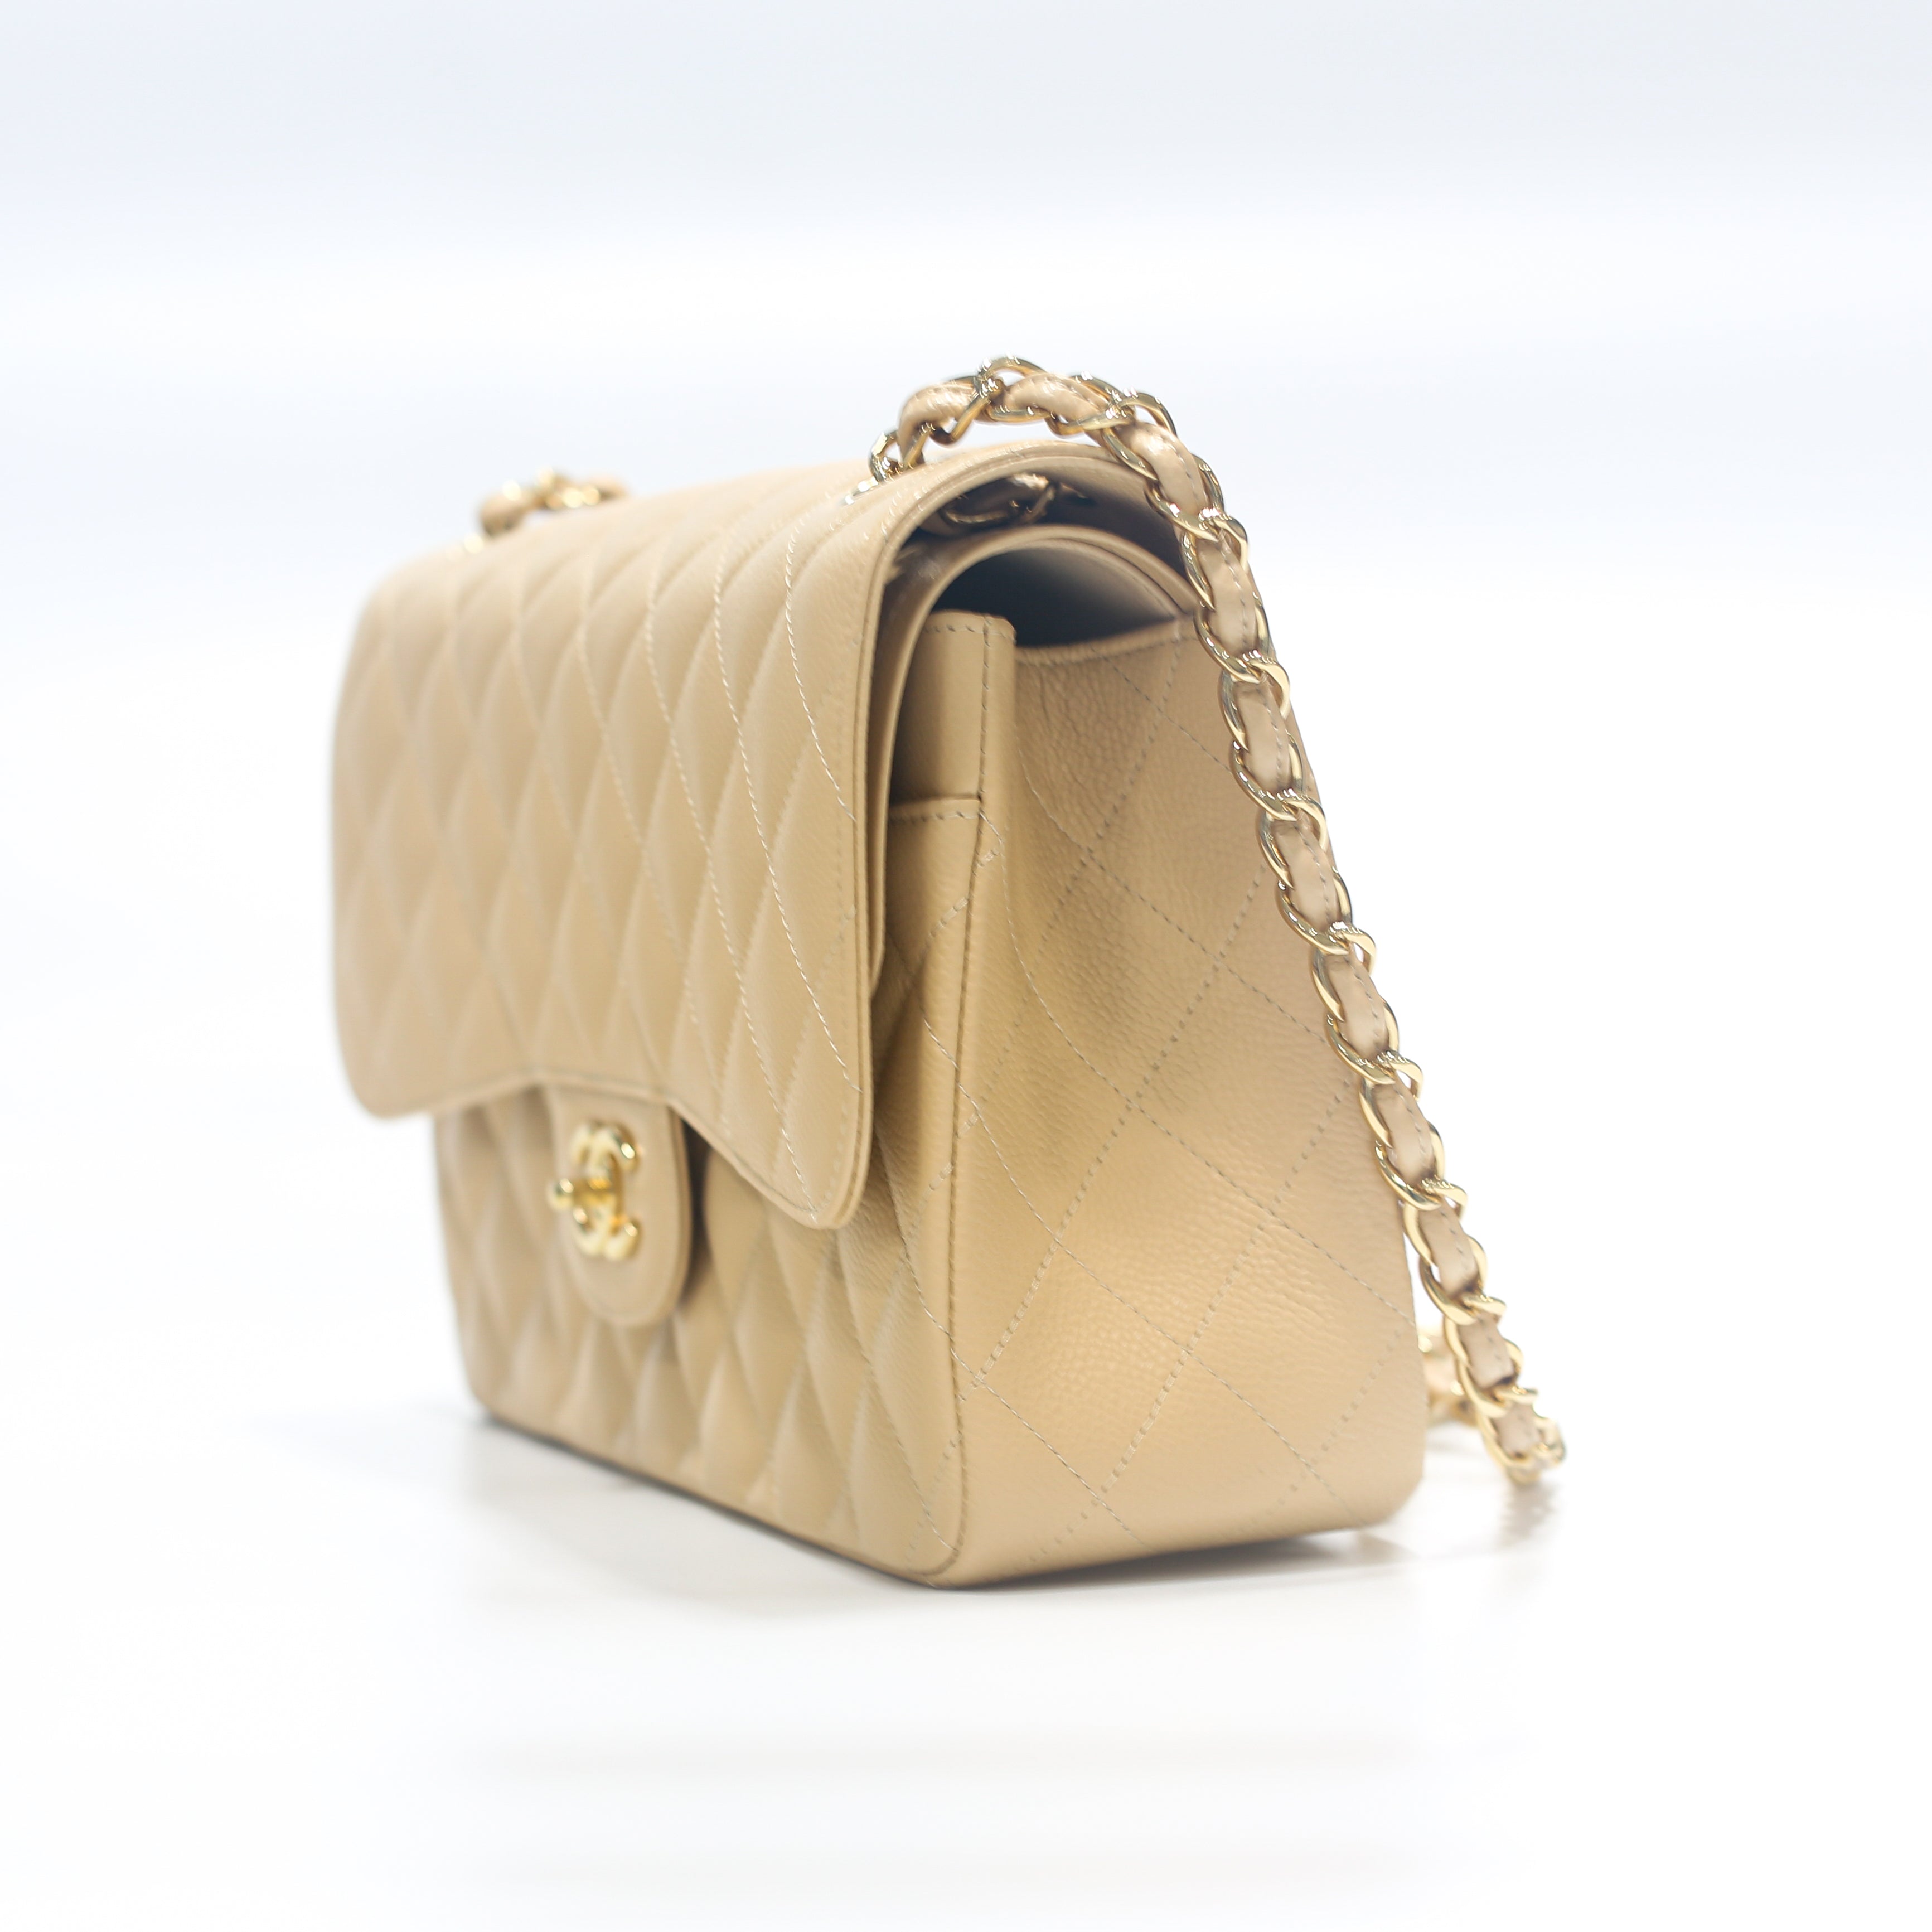 Beige Quilted Caviar New Classic Double Flap Jumbo